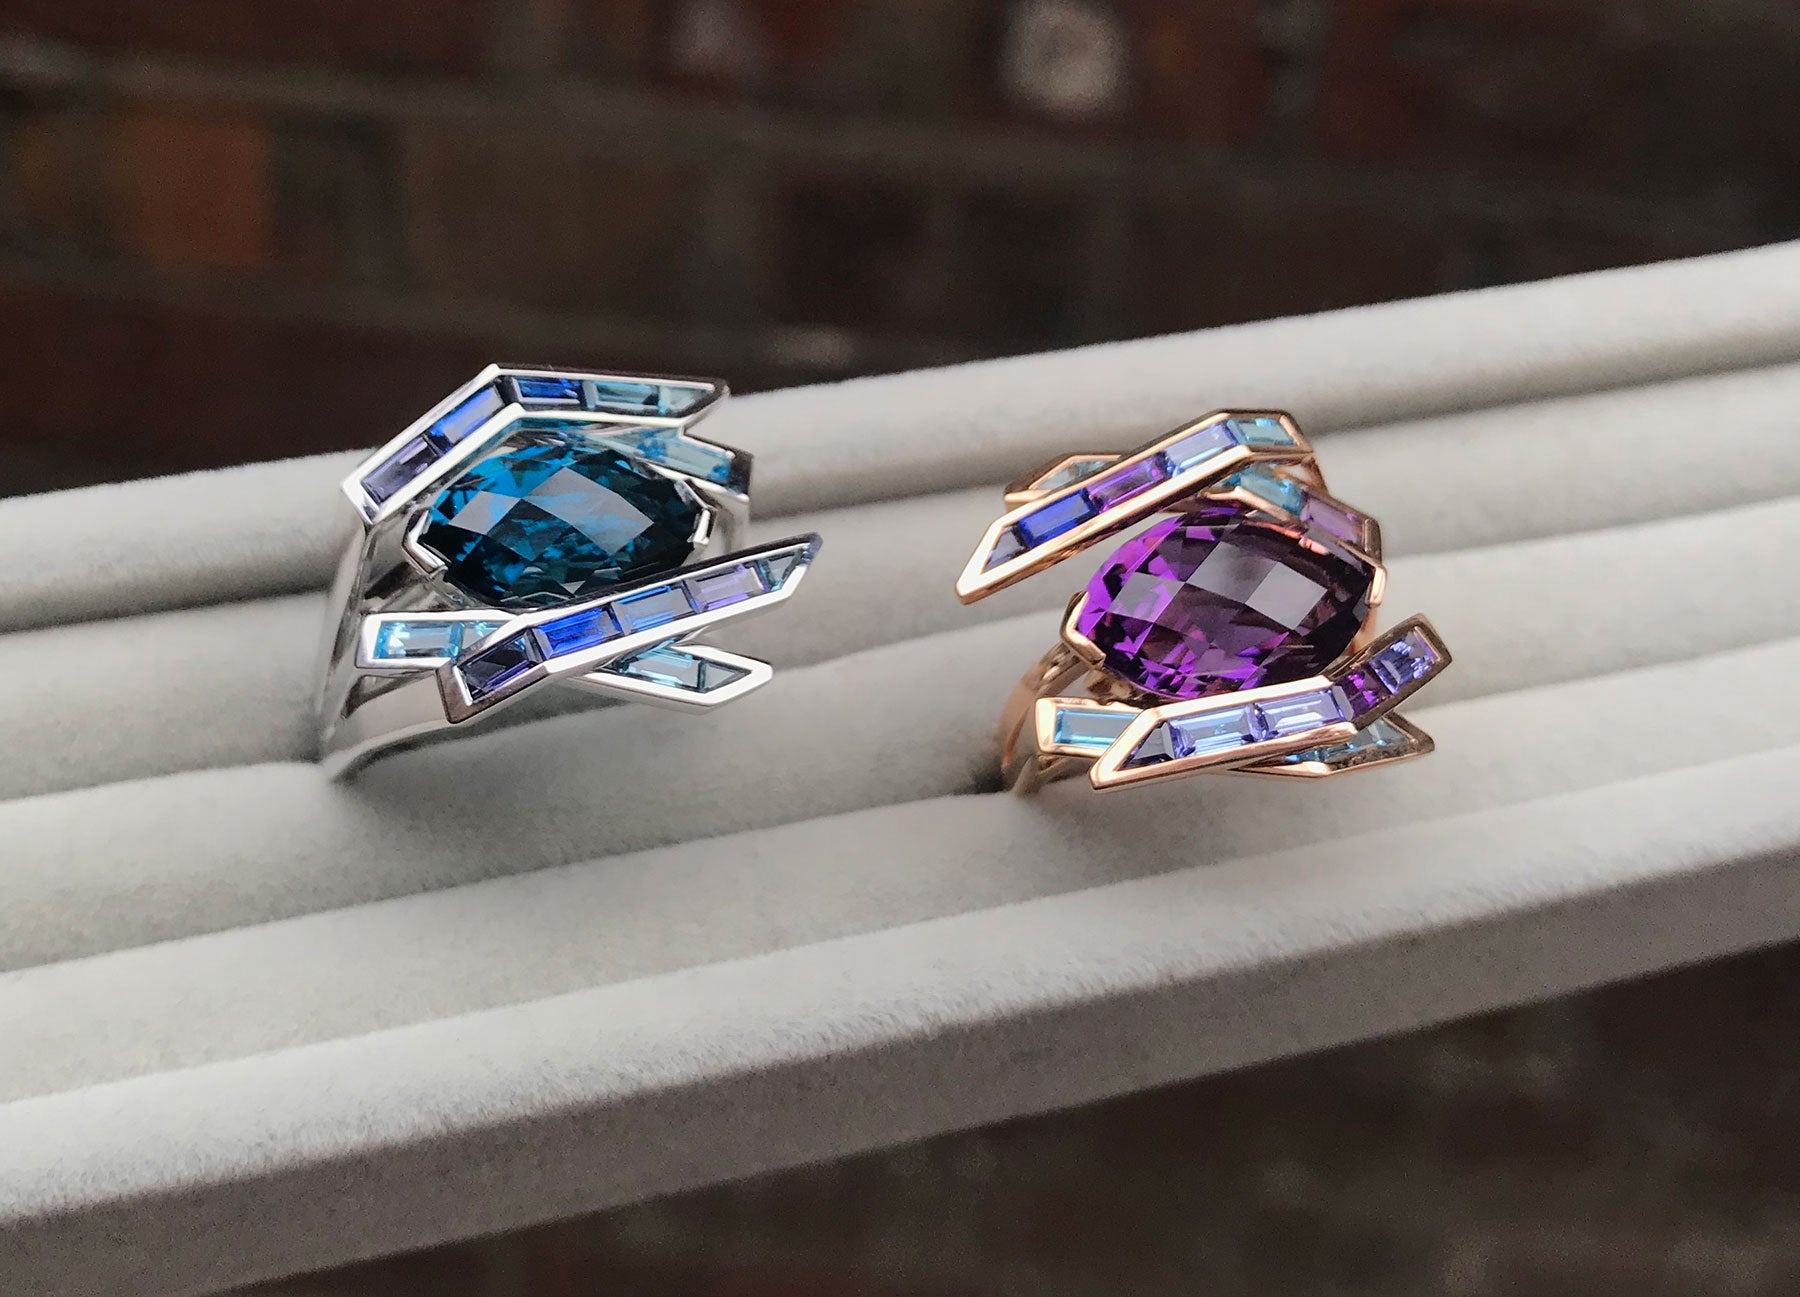 Electric Night Blue Topaz Cocktail Ring and Amethyst Cocktail Ring Side By Side